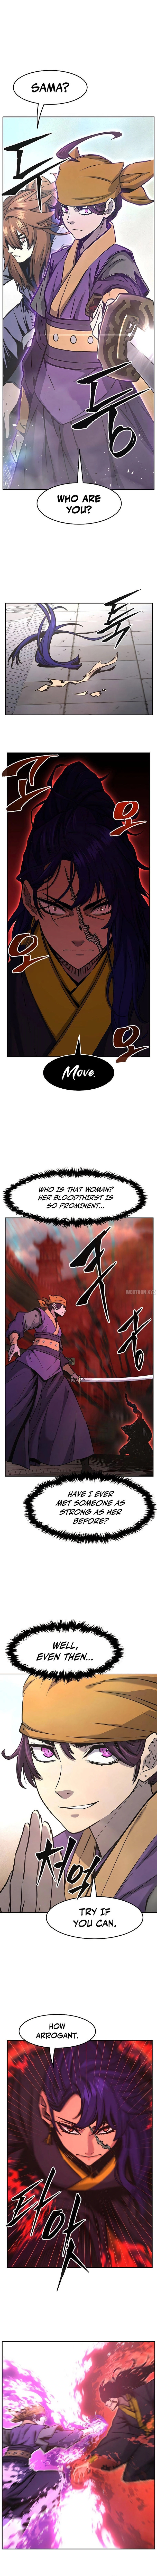 Absolute Sword Sense - Chapter 72 Page 8